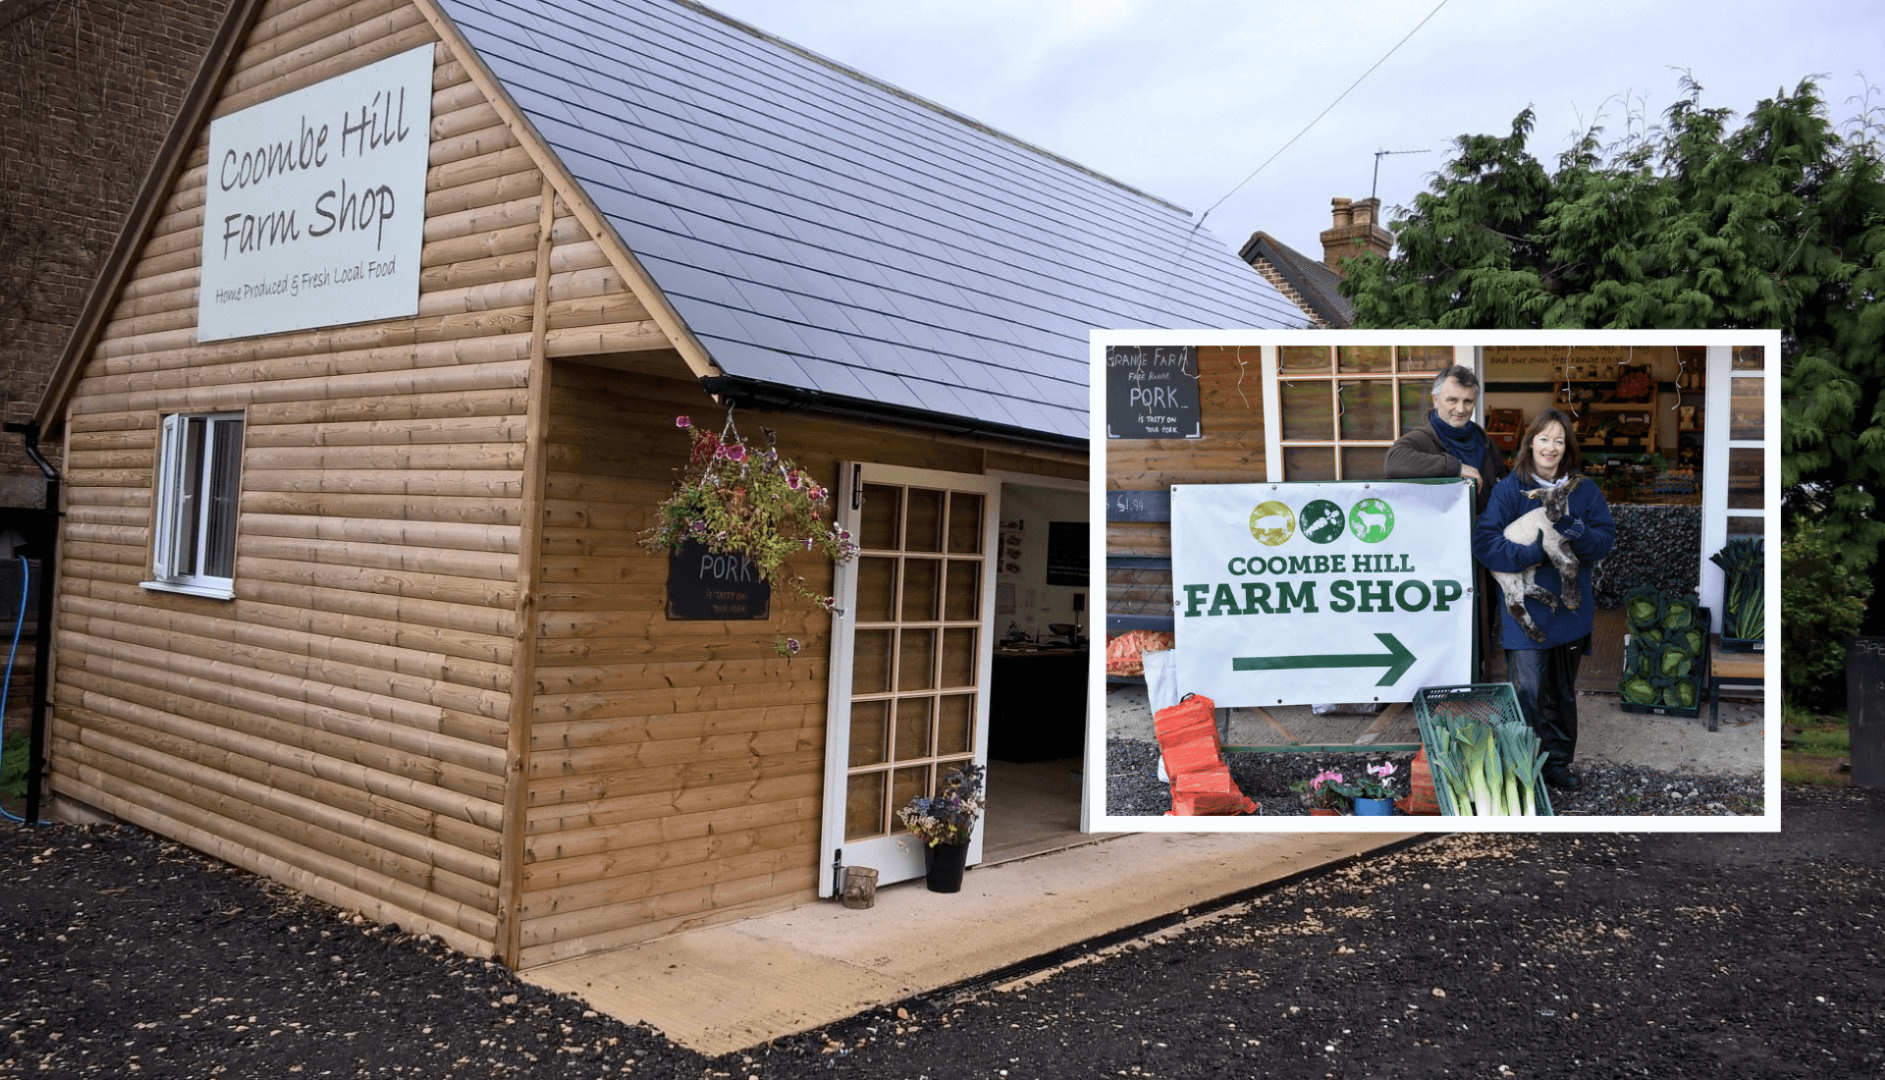 Coombe Hill Farm Shop in Gloucester